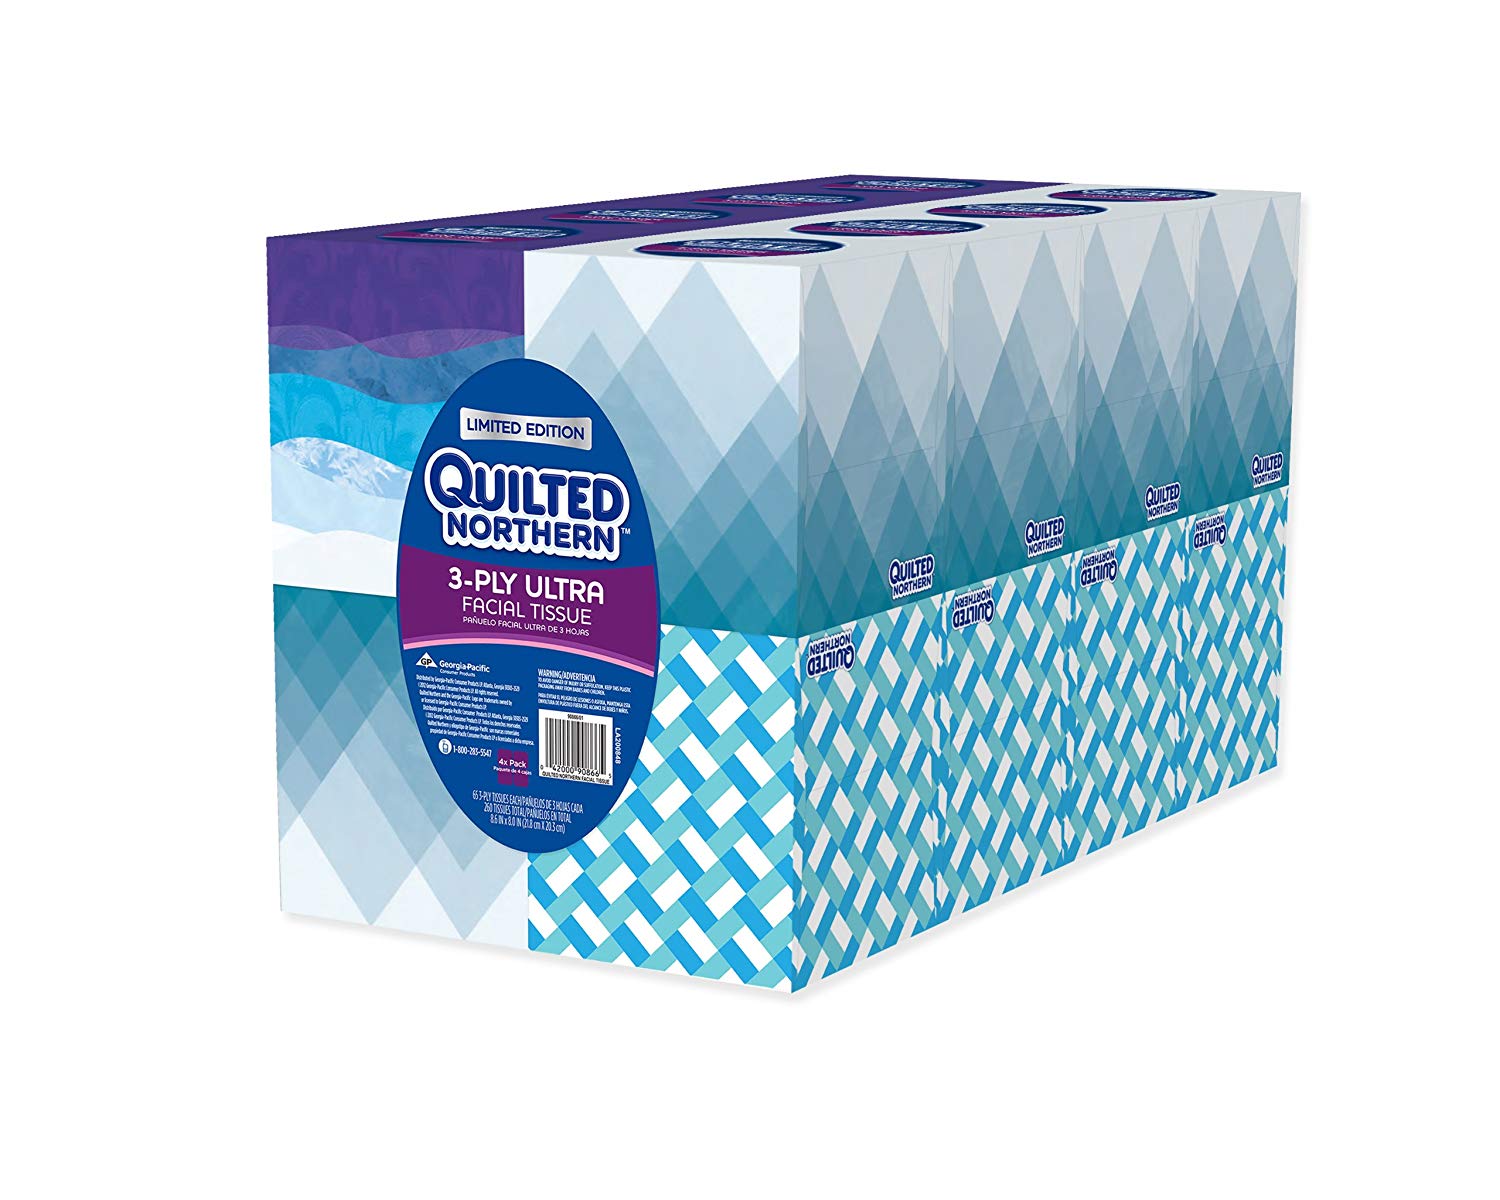 2 Ply 85 Count 4 Pack Seventh Generation Facial Tissues Cube